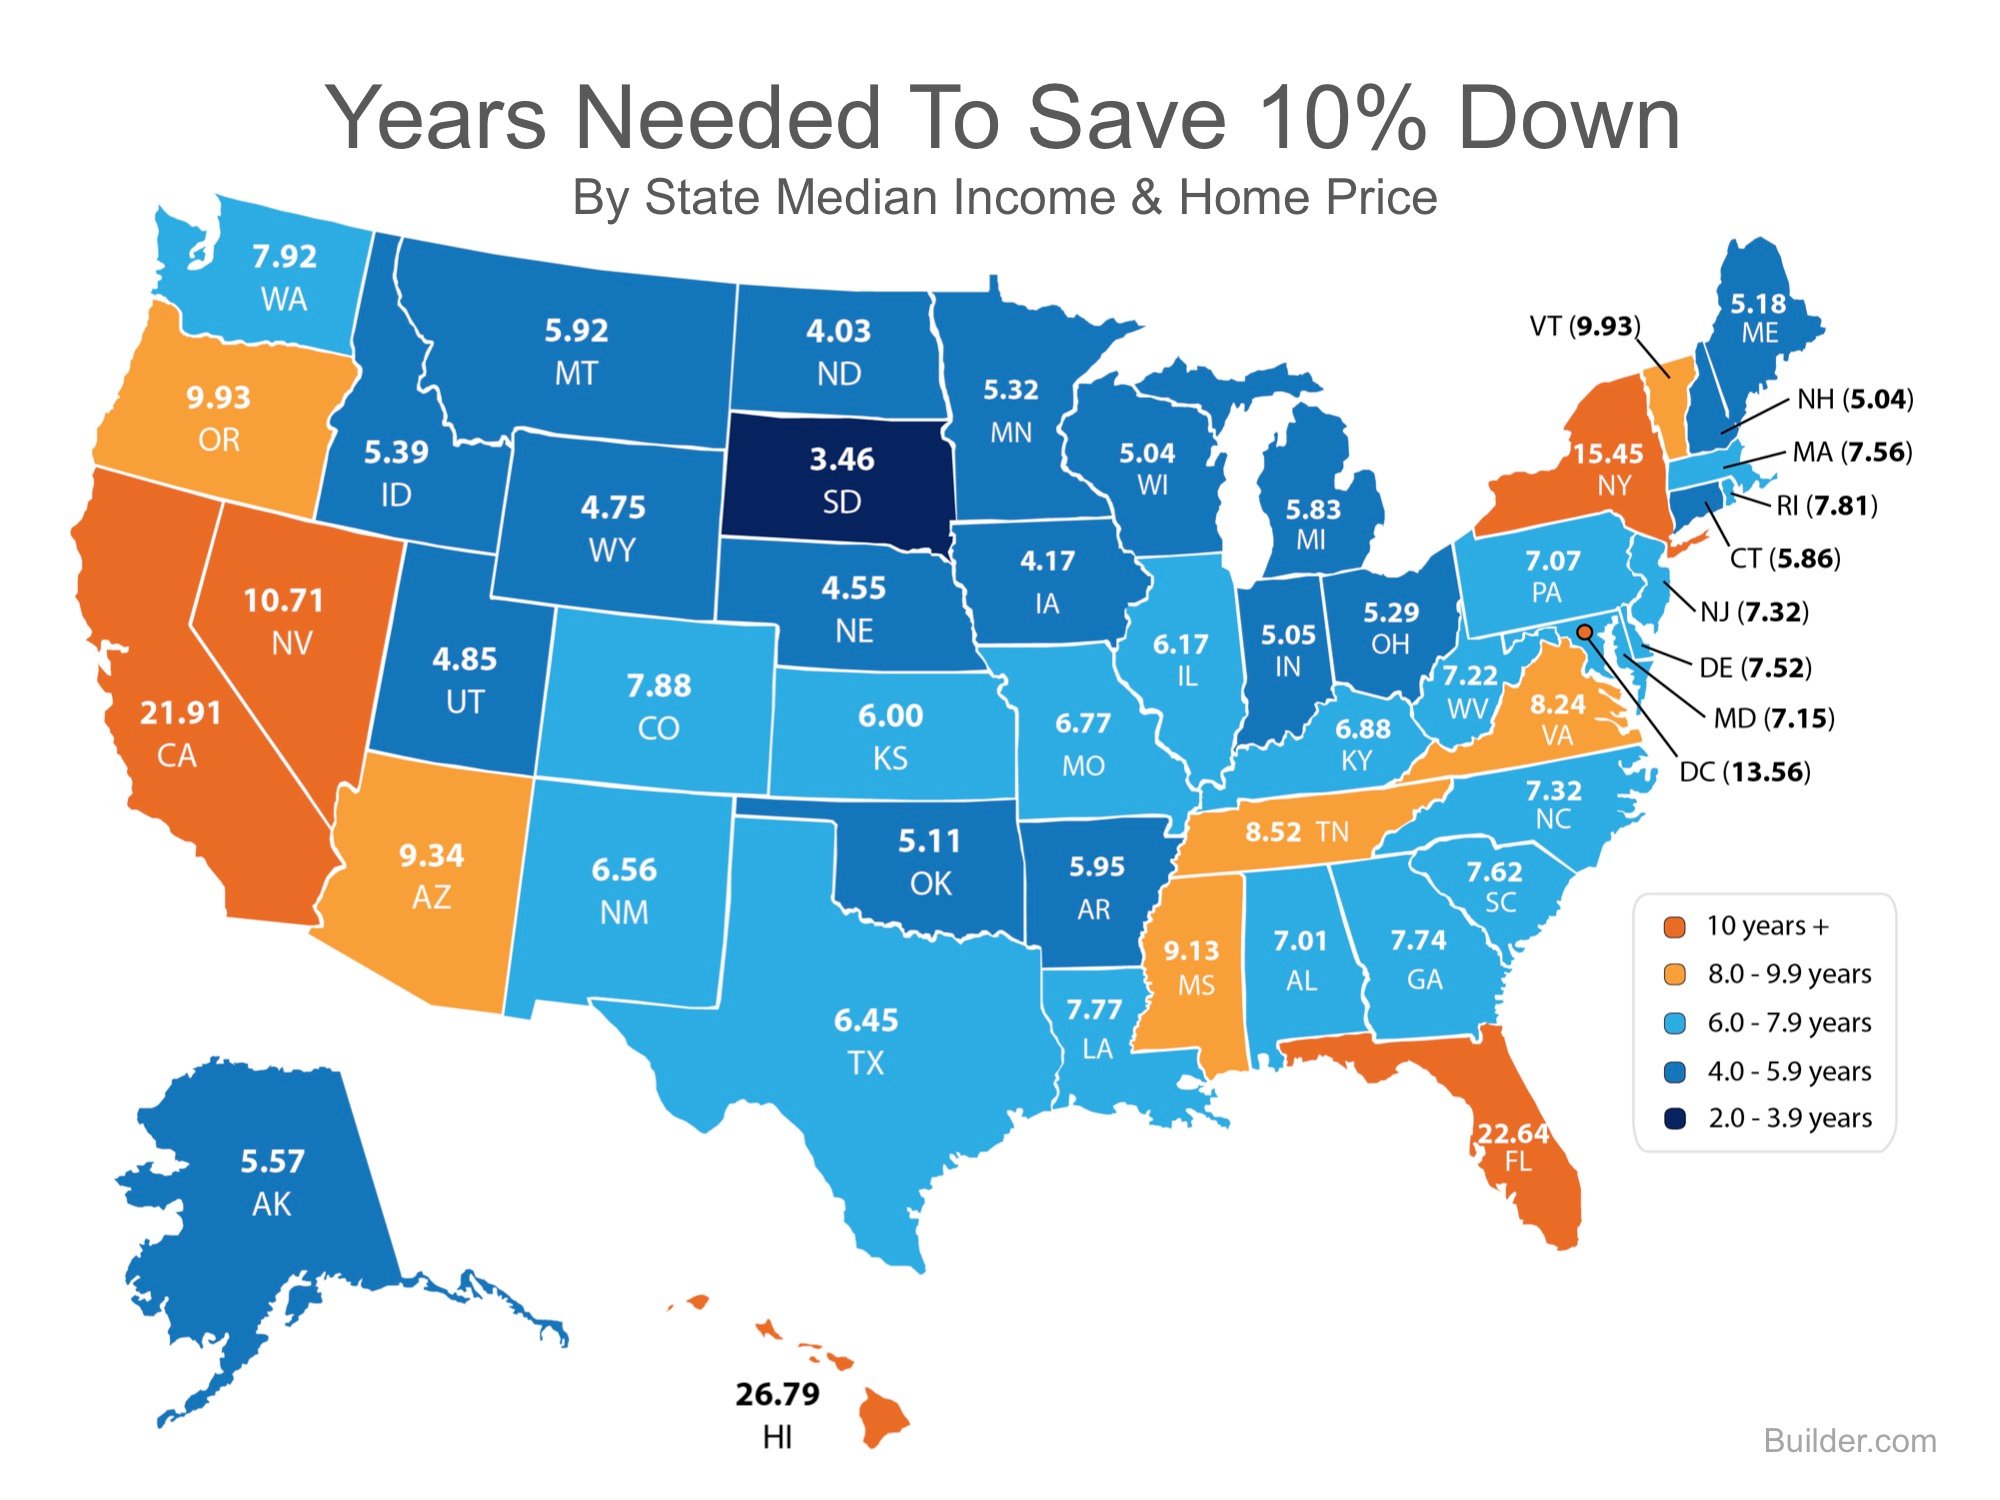 Years Needed to Save 10% | Simplifying The Market